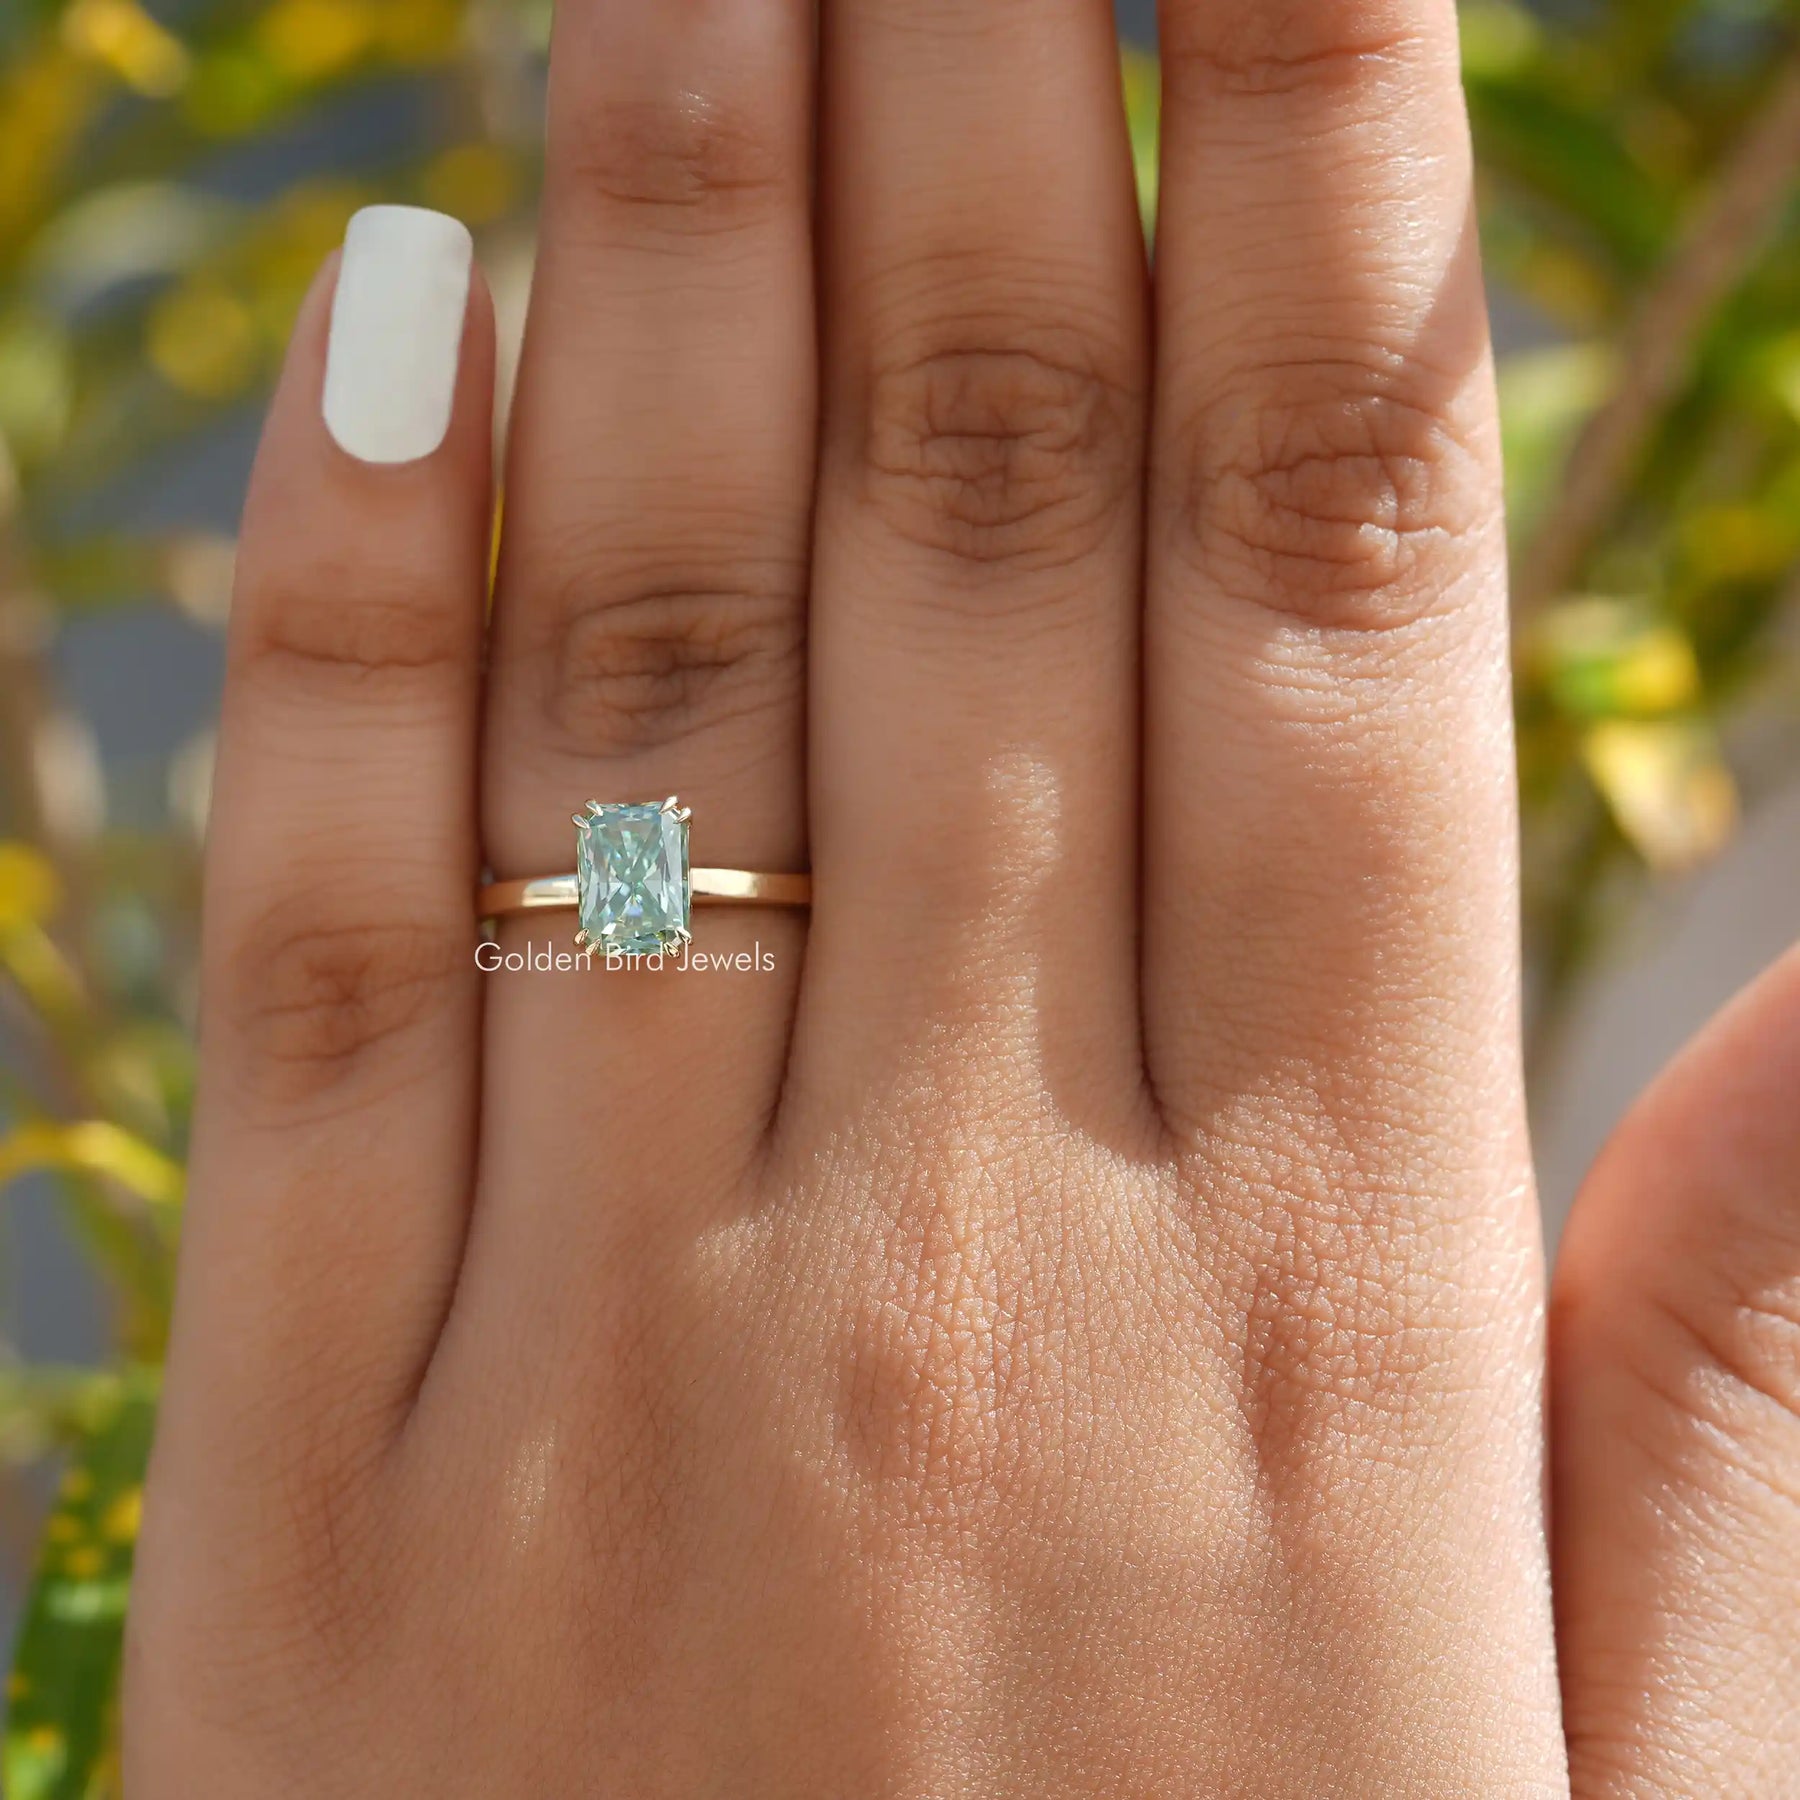 Radiant Cut Solitaire Engagement Ring